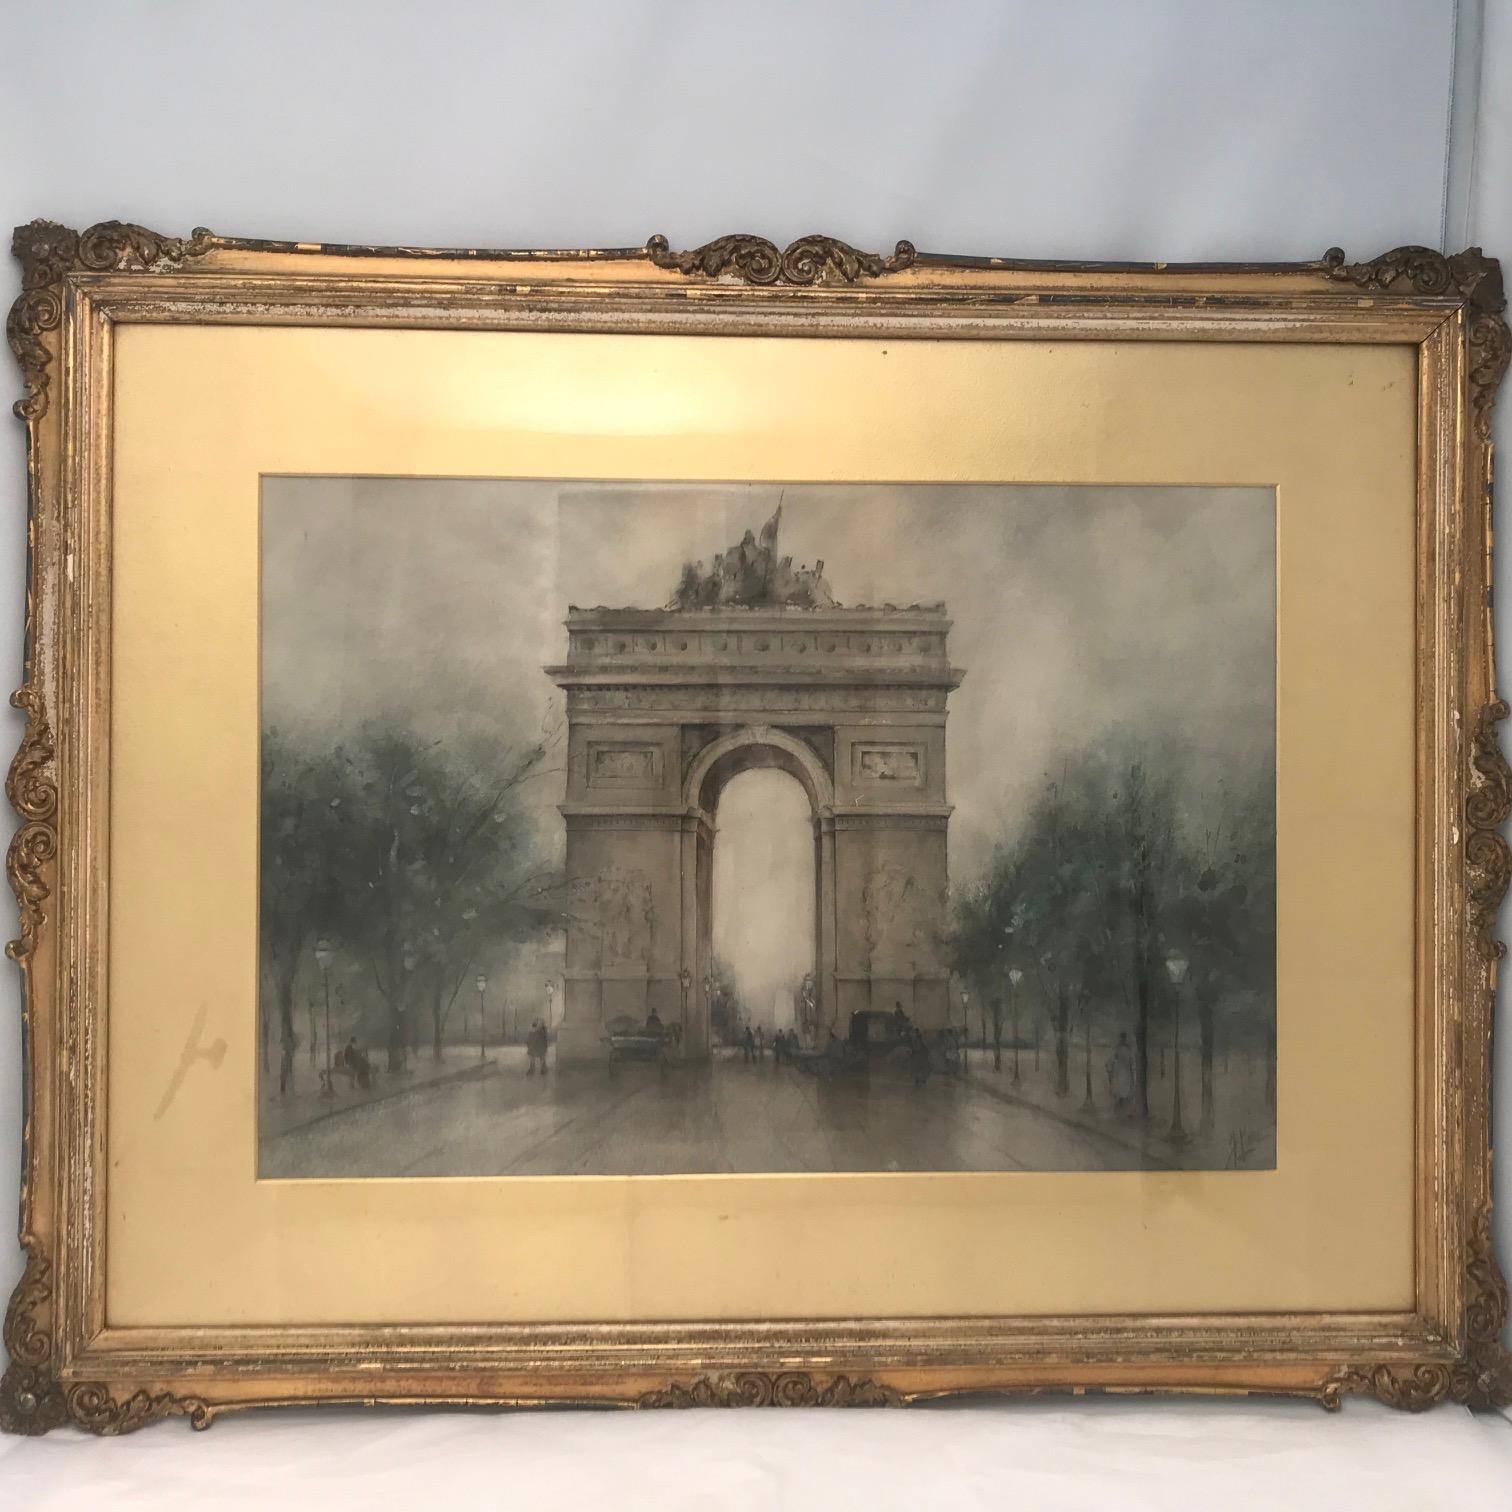 This American water-colorist shows here his light touch and skillful handling of his medium. This painting dates from the last half of the 19th century. The treatment of the foliage, the tiny well-drawn figures, carriages, street lights and the